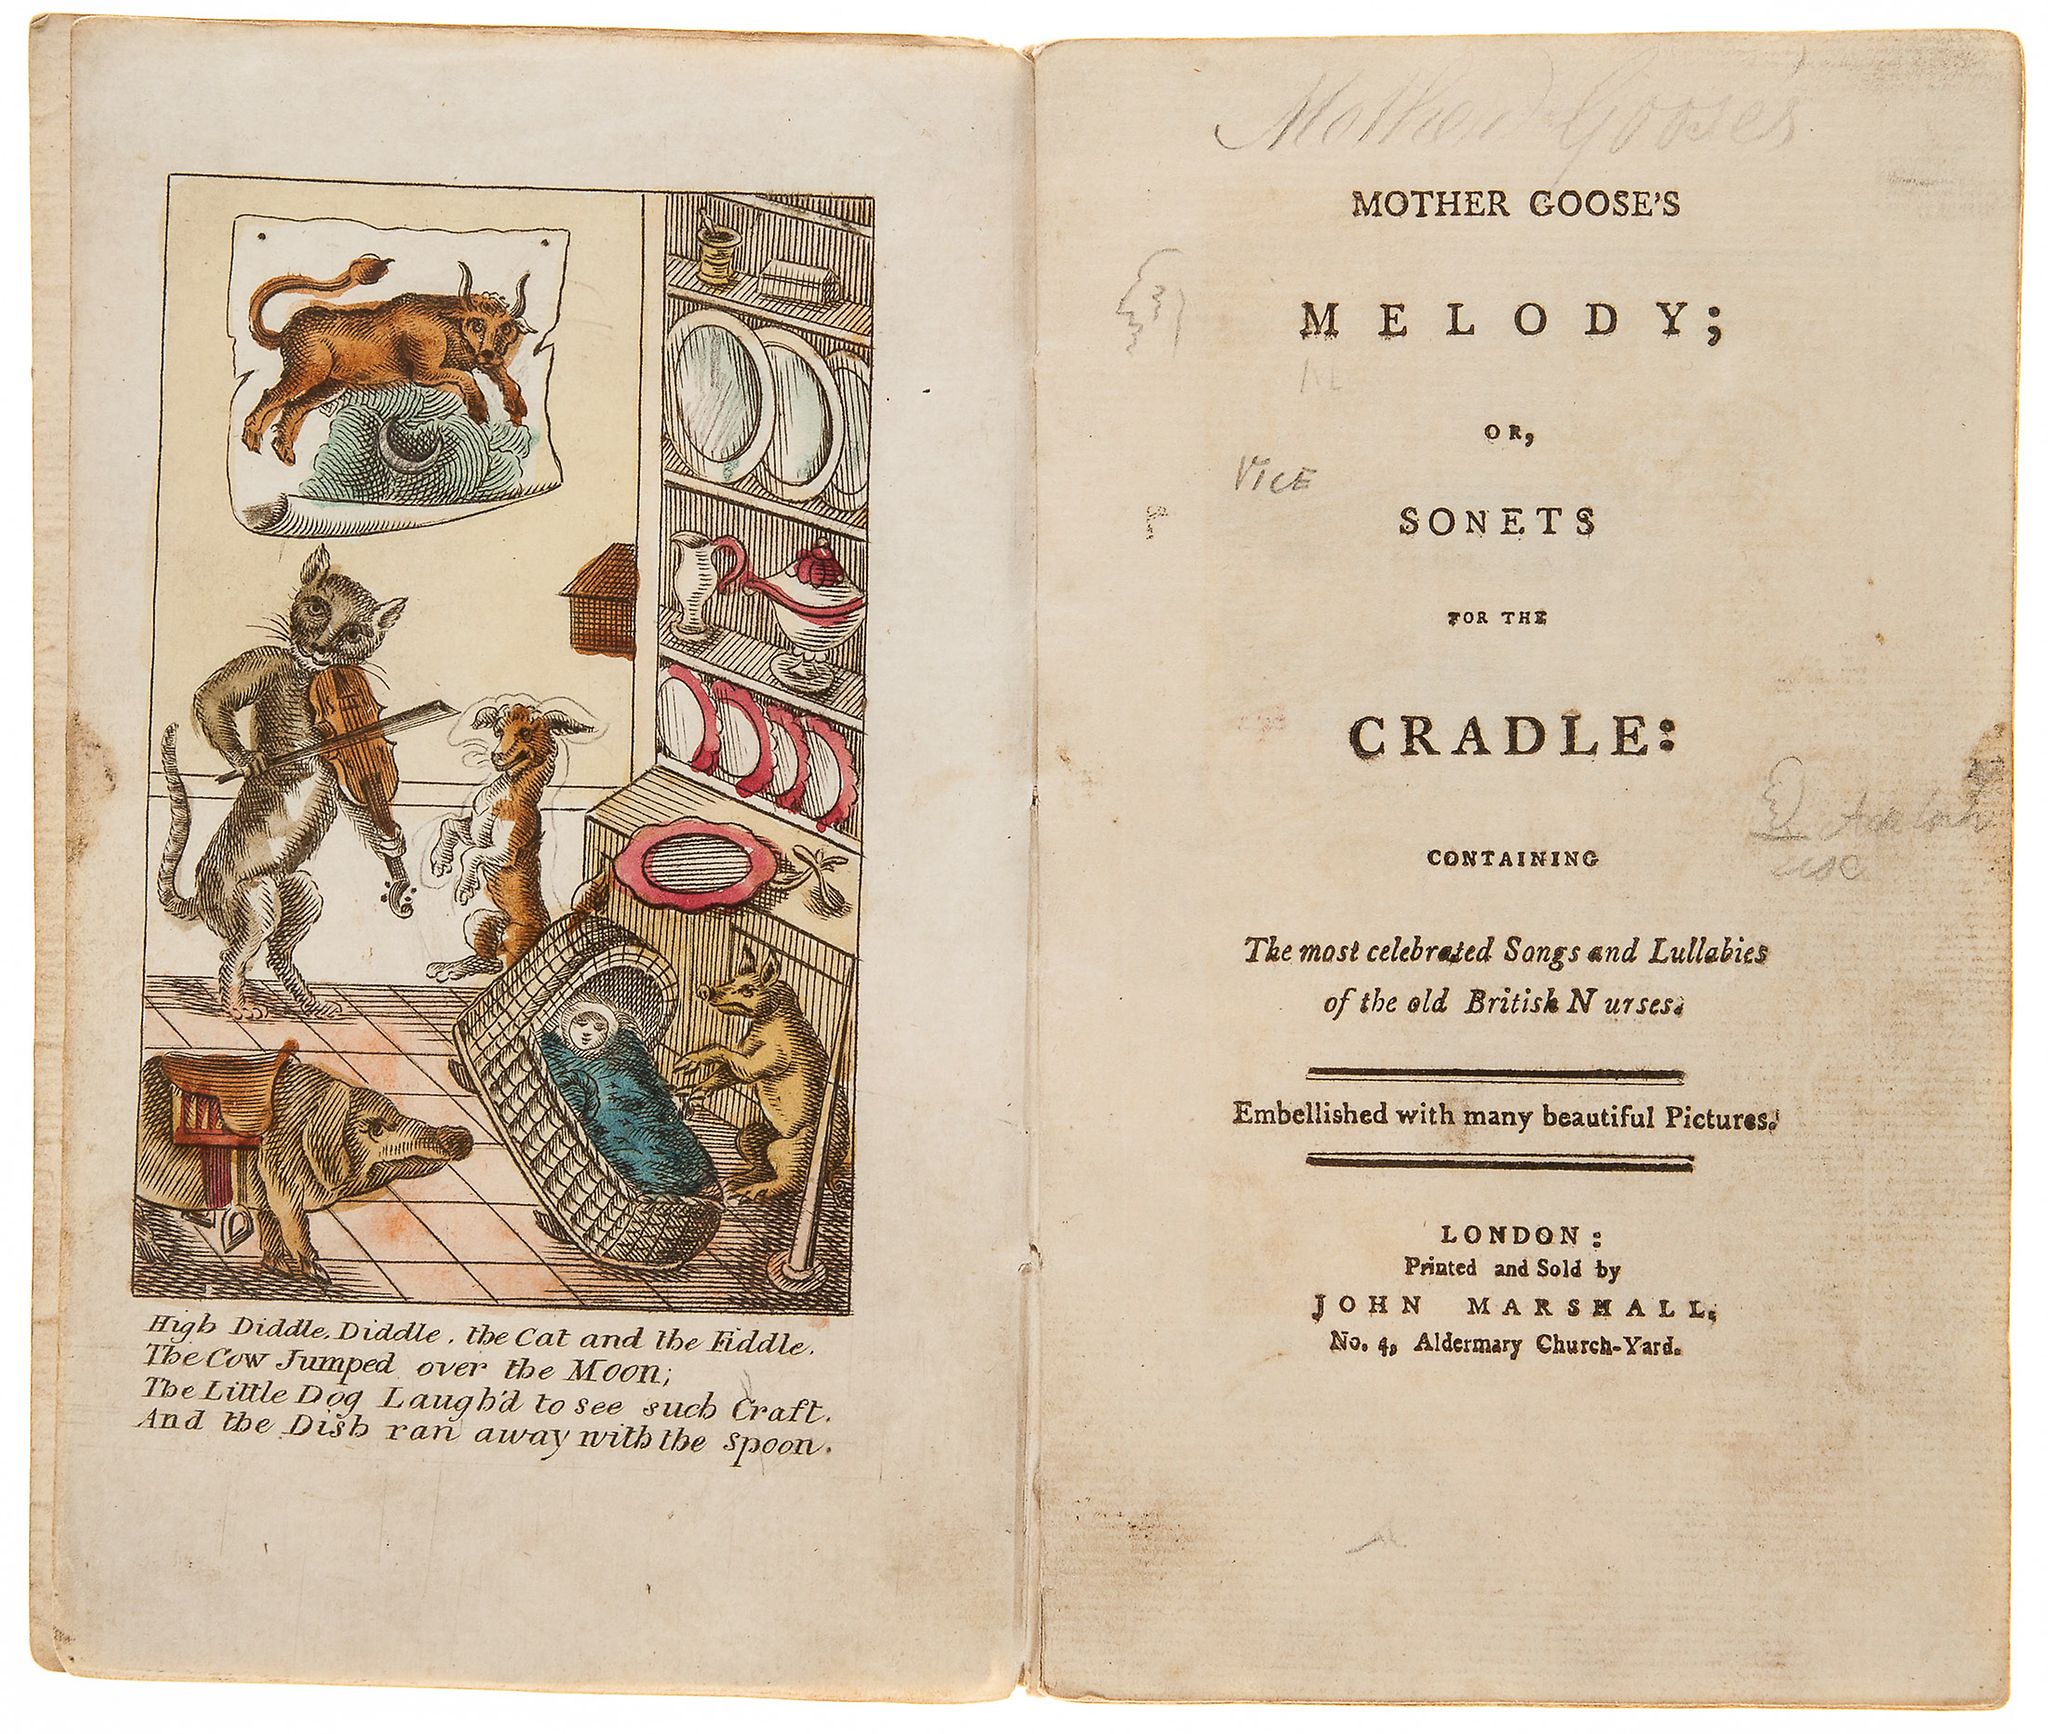 Mother Goose's Melody, or Sonnets for the Cradle, containing the most celebrated Songs and Lullabies